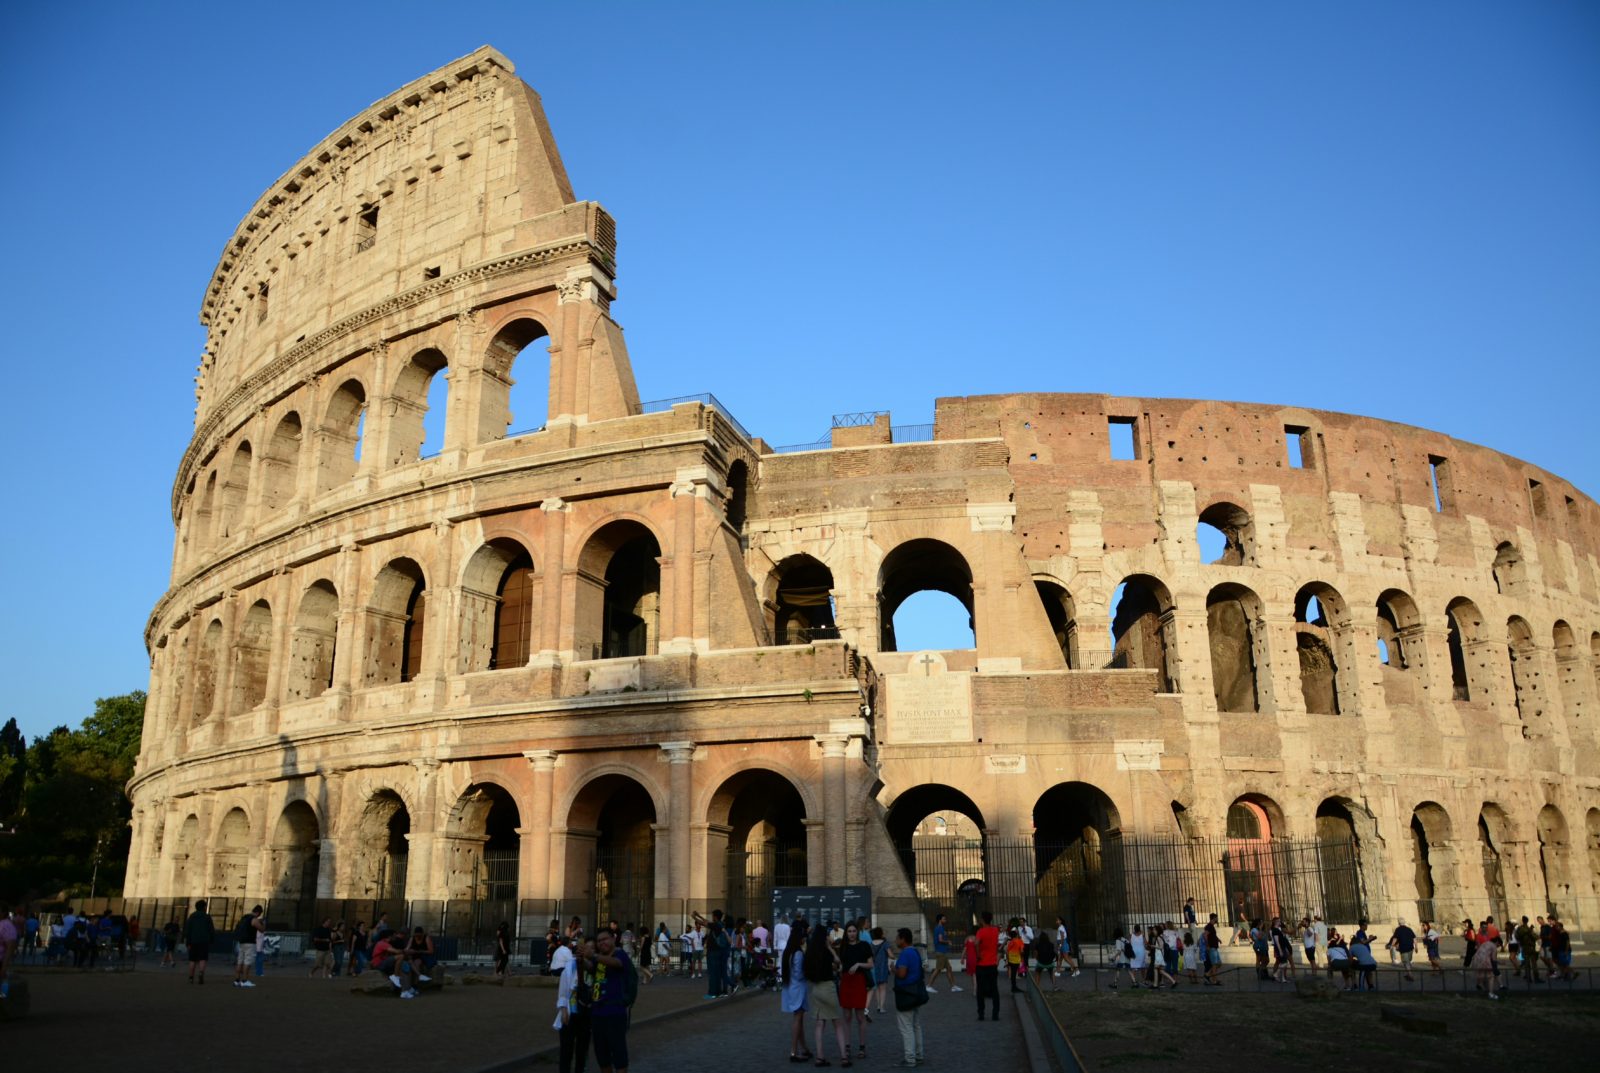 Colosseum in Rome, ancient